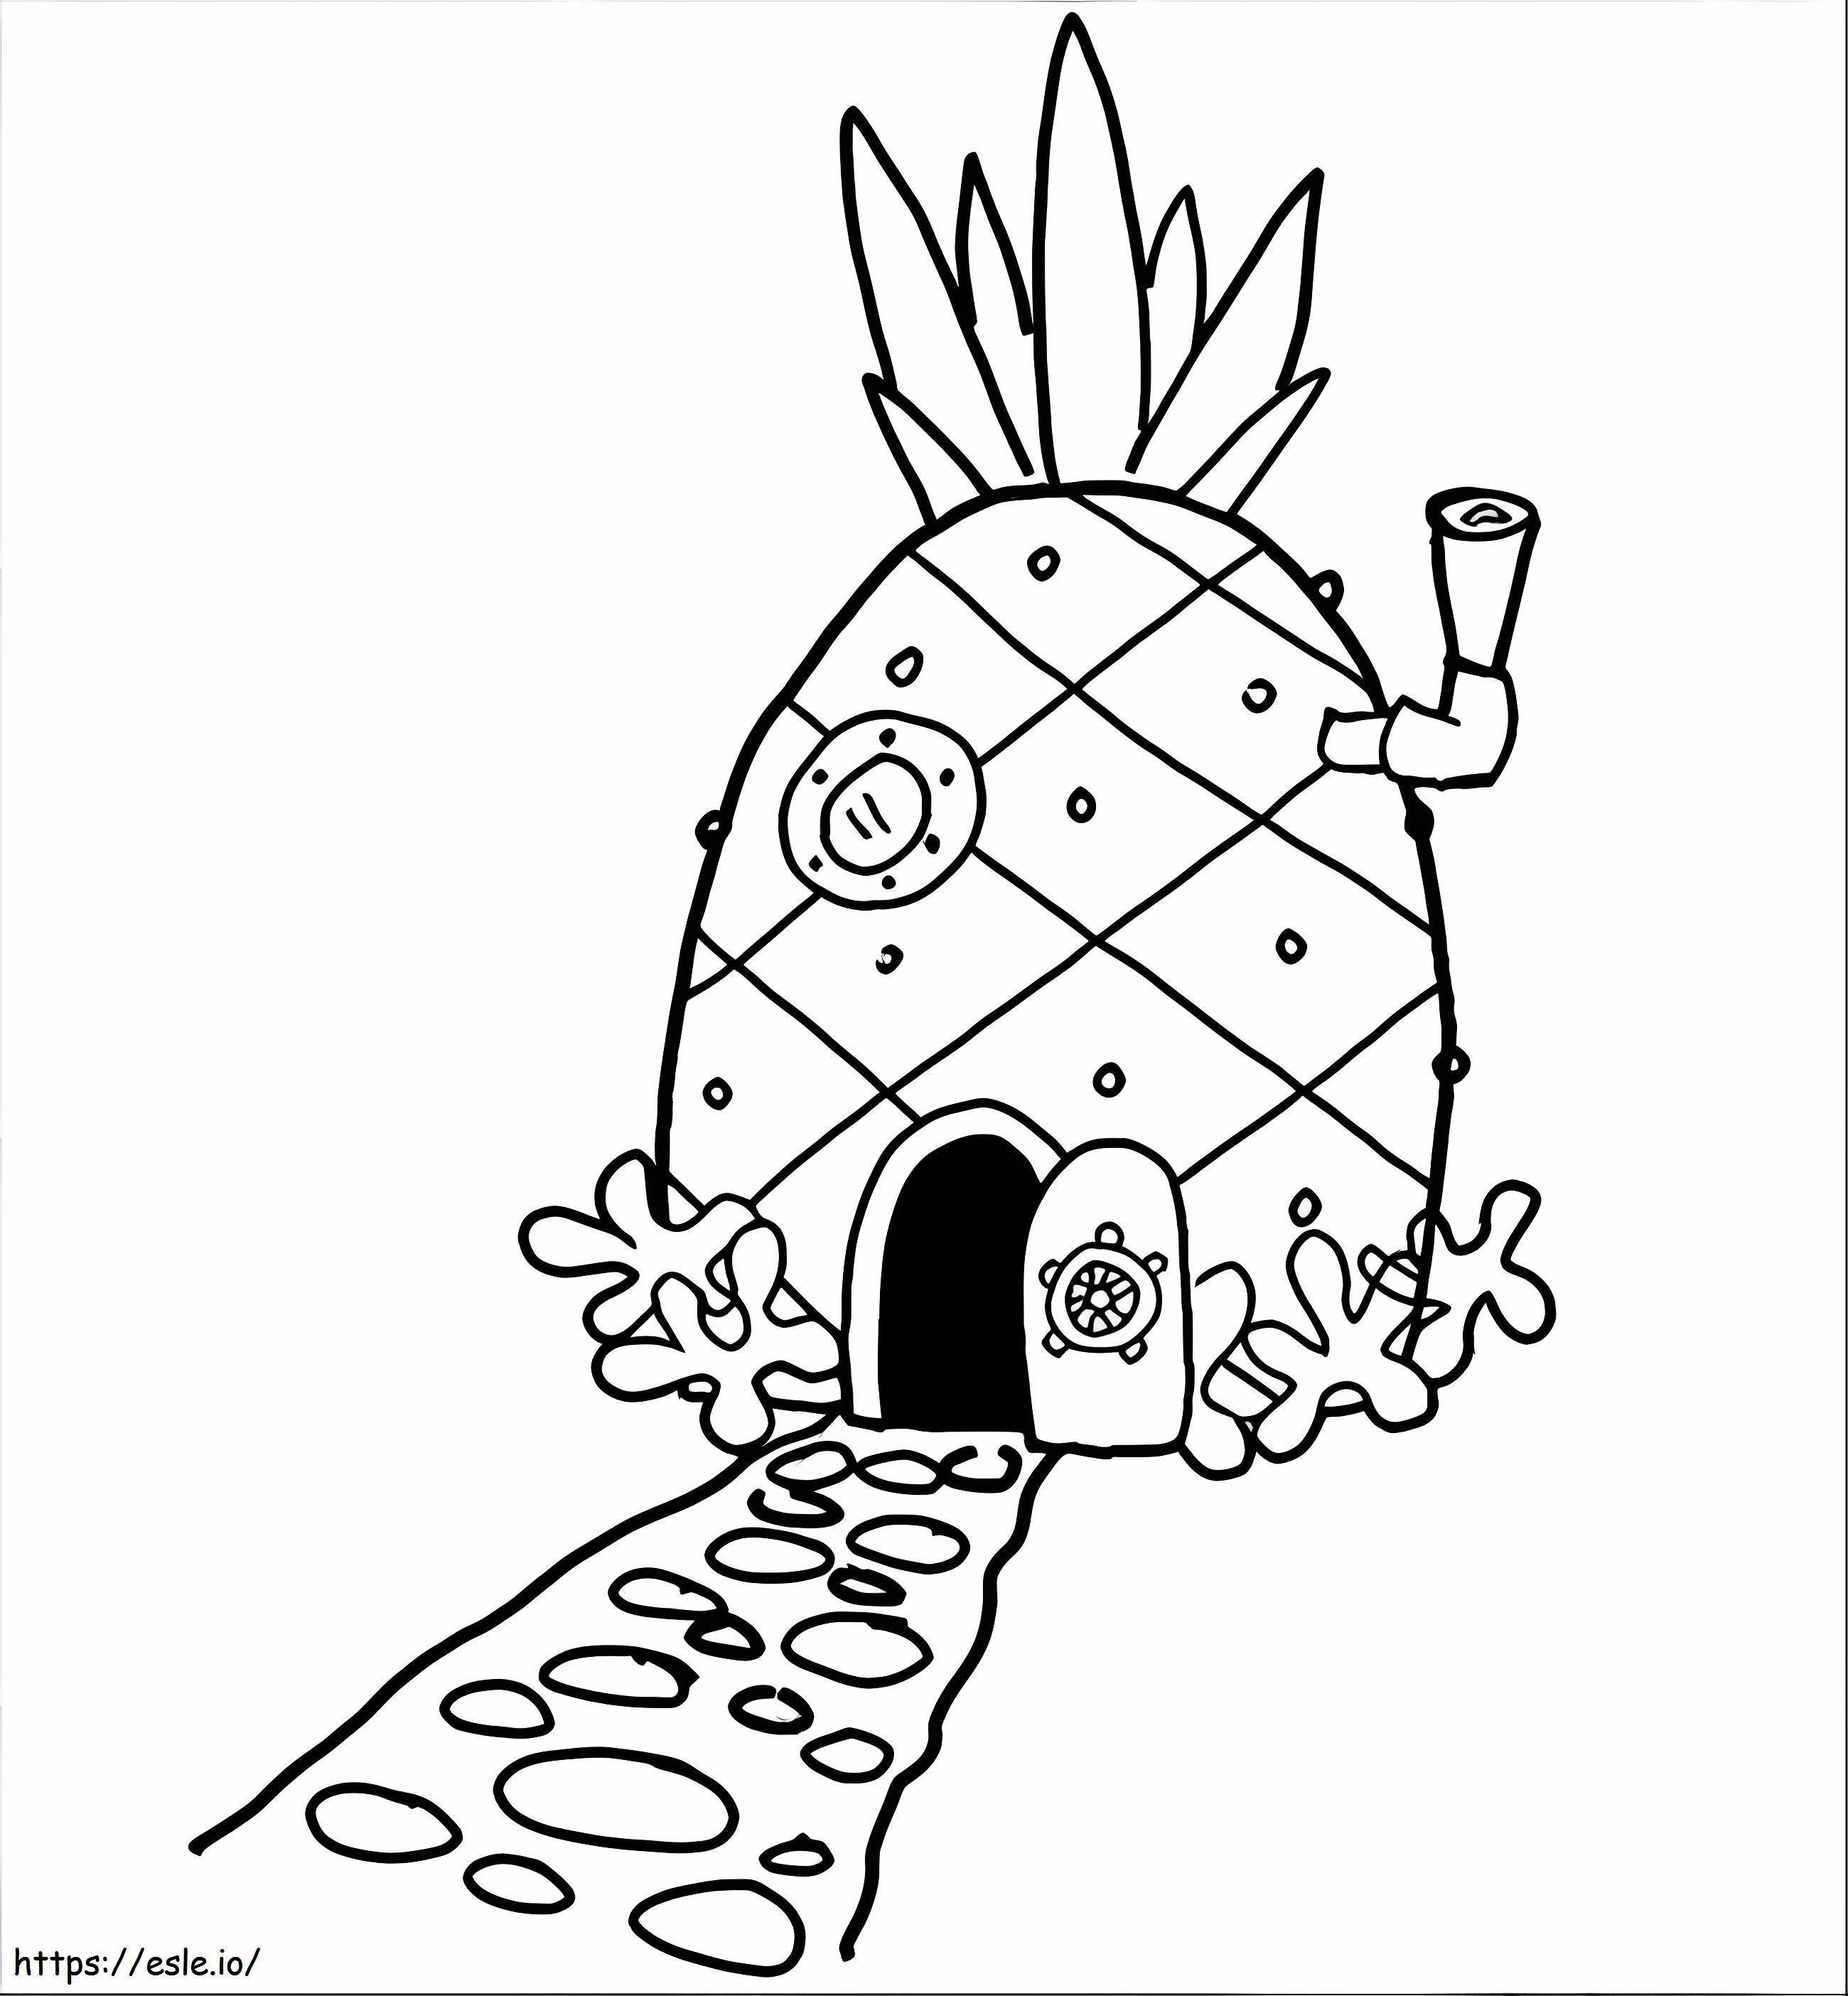 Pineapple House coloring page